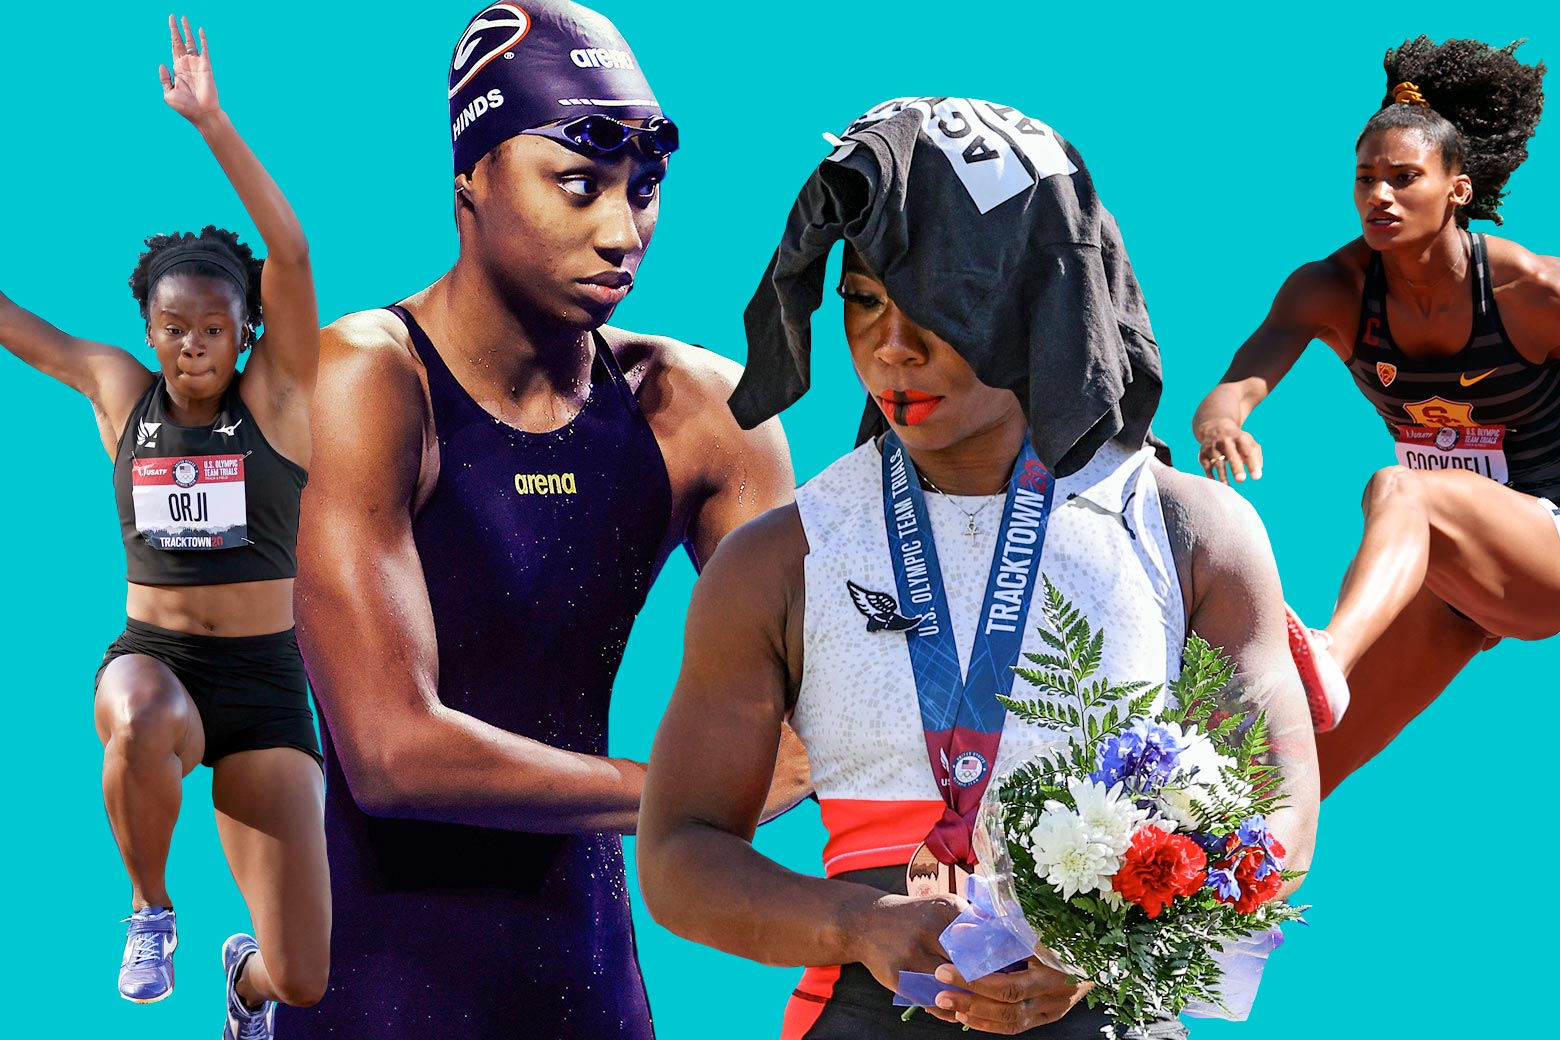 Collage of Keturah Orji triple jumping, Natalie Hinds in a swimsuit, Gwen Berry wearing a medal and holding a bouquet, and Anna Cockrell hurdling